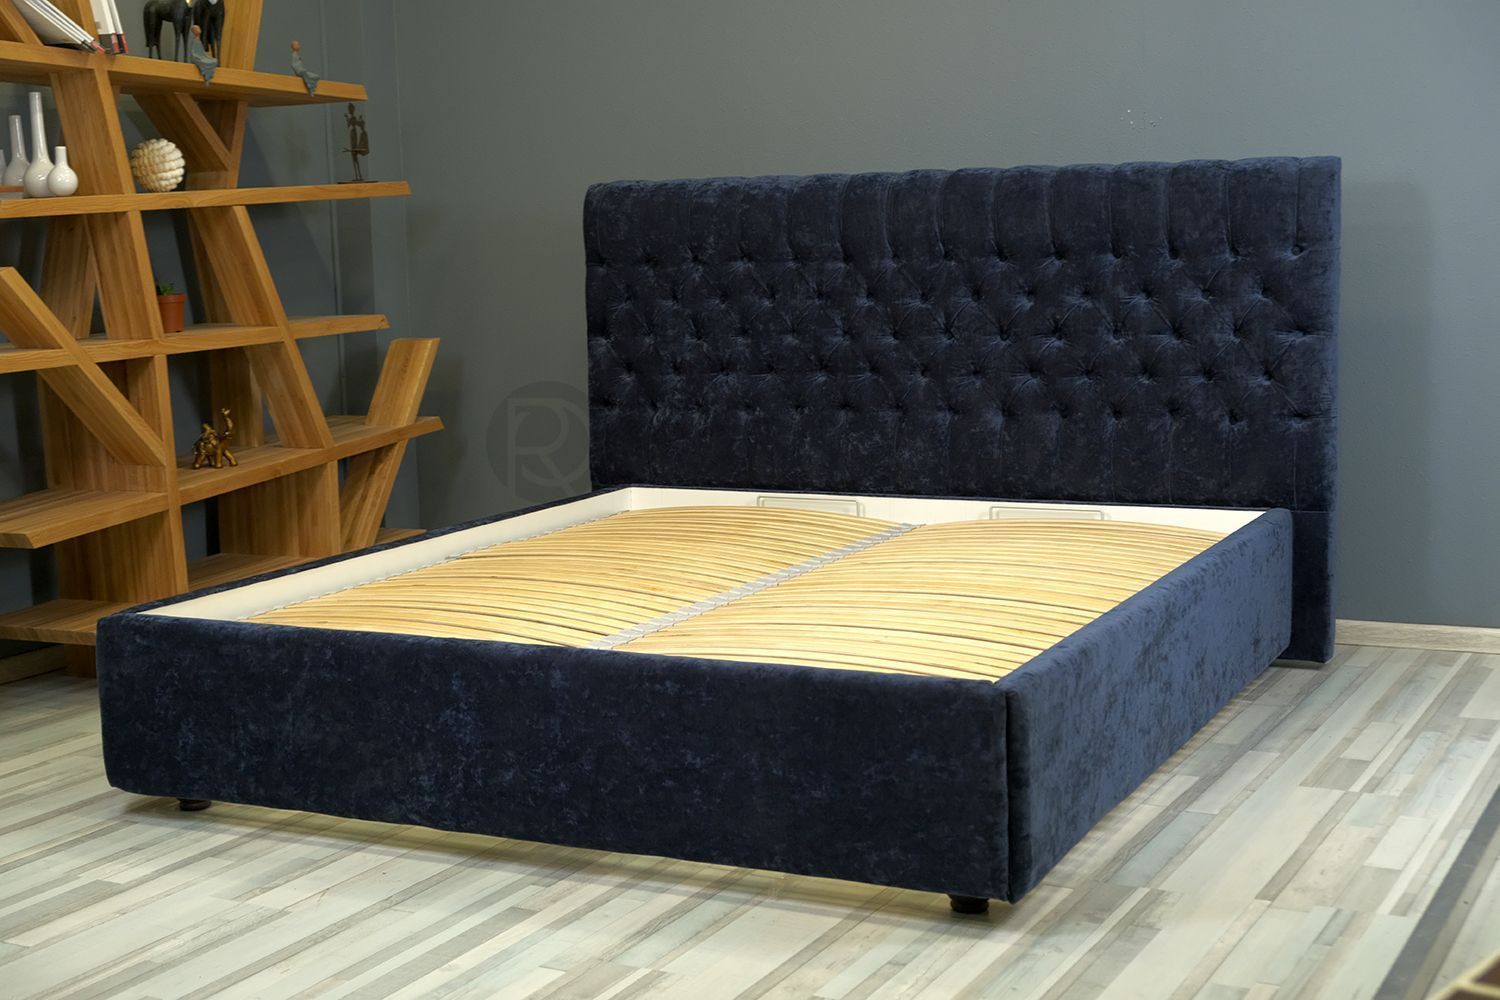 CHESTERFIELD BLUE by Romatti bed